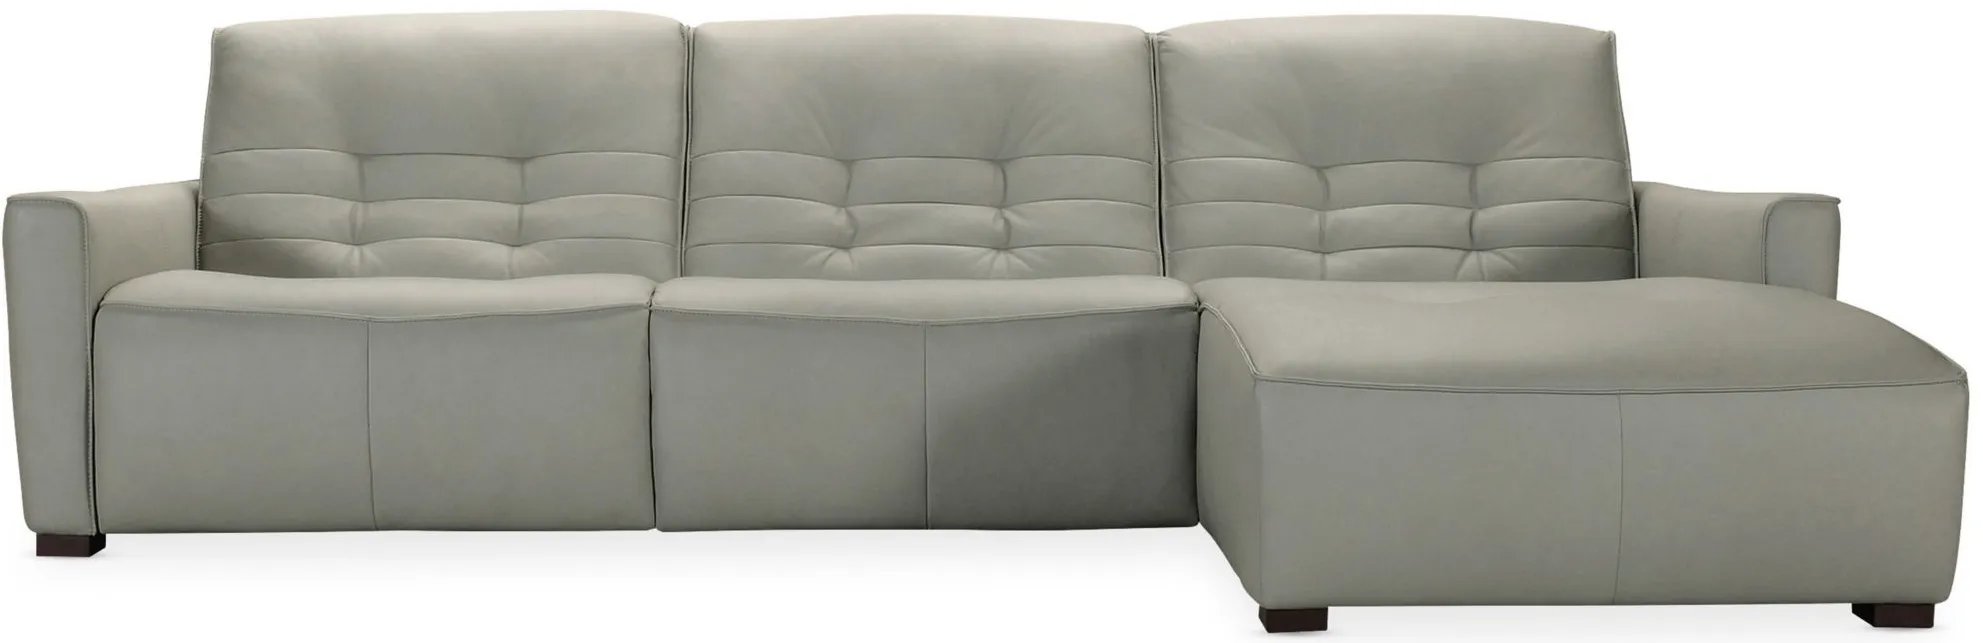 Reaux 3-pc. Power Reclining Sofa w/ Chaise in Grey by Hooker Furniture